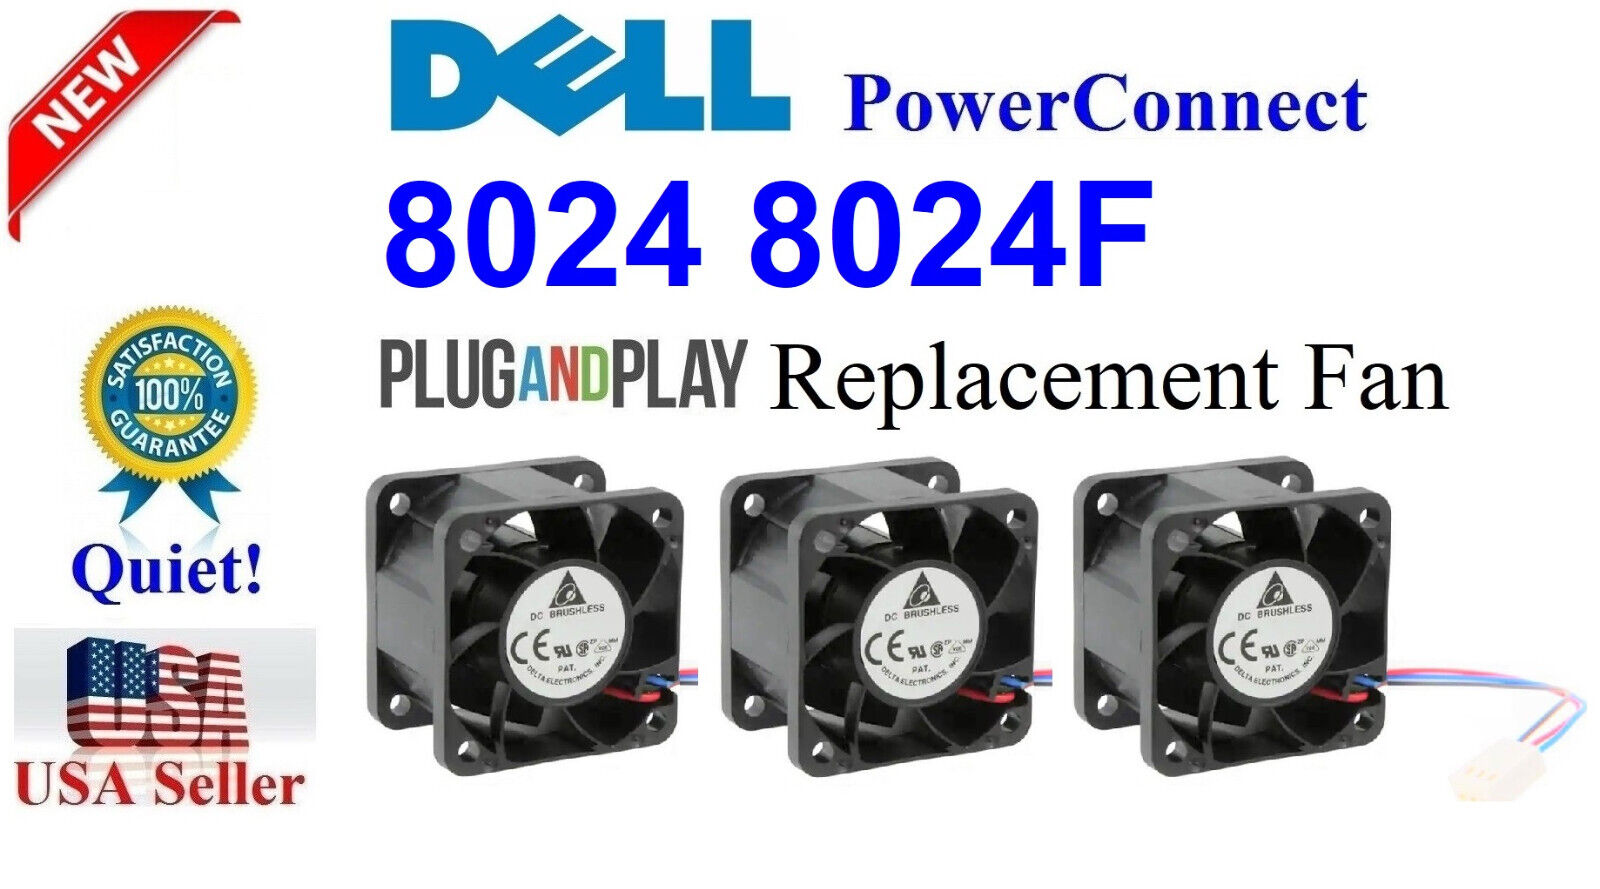 3x Quiet (30dBA) Noise Replacement fans Dell PowerConnect 8024 8024F FanAssembly